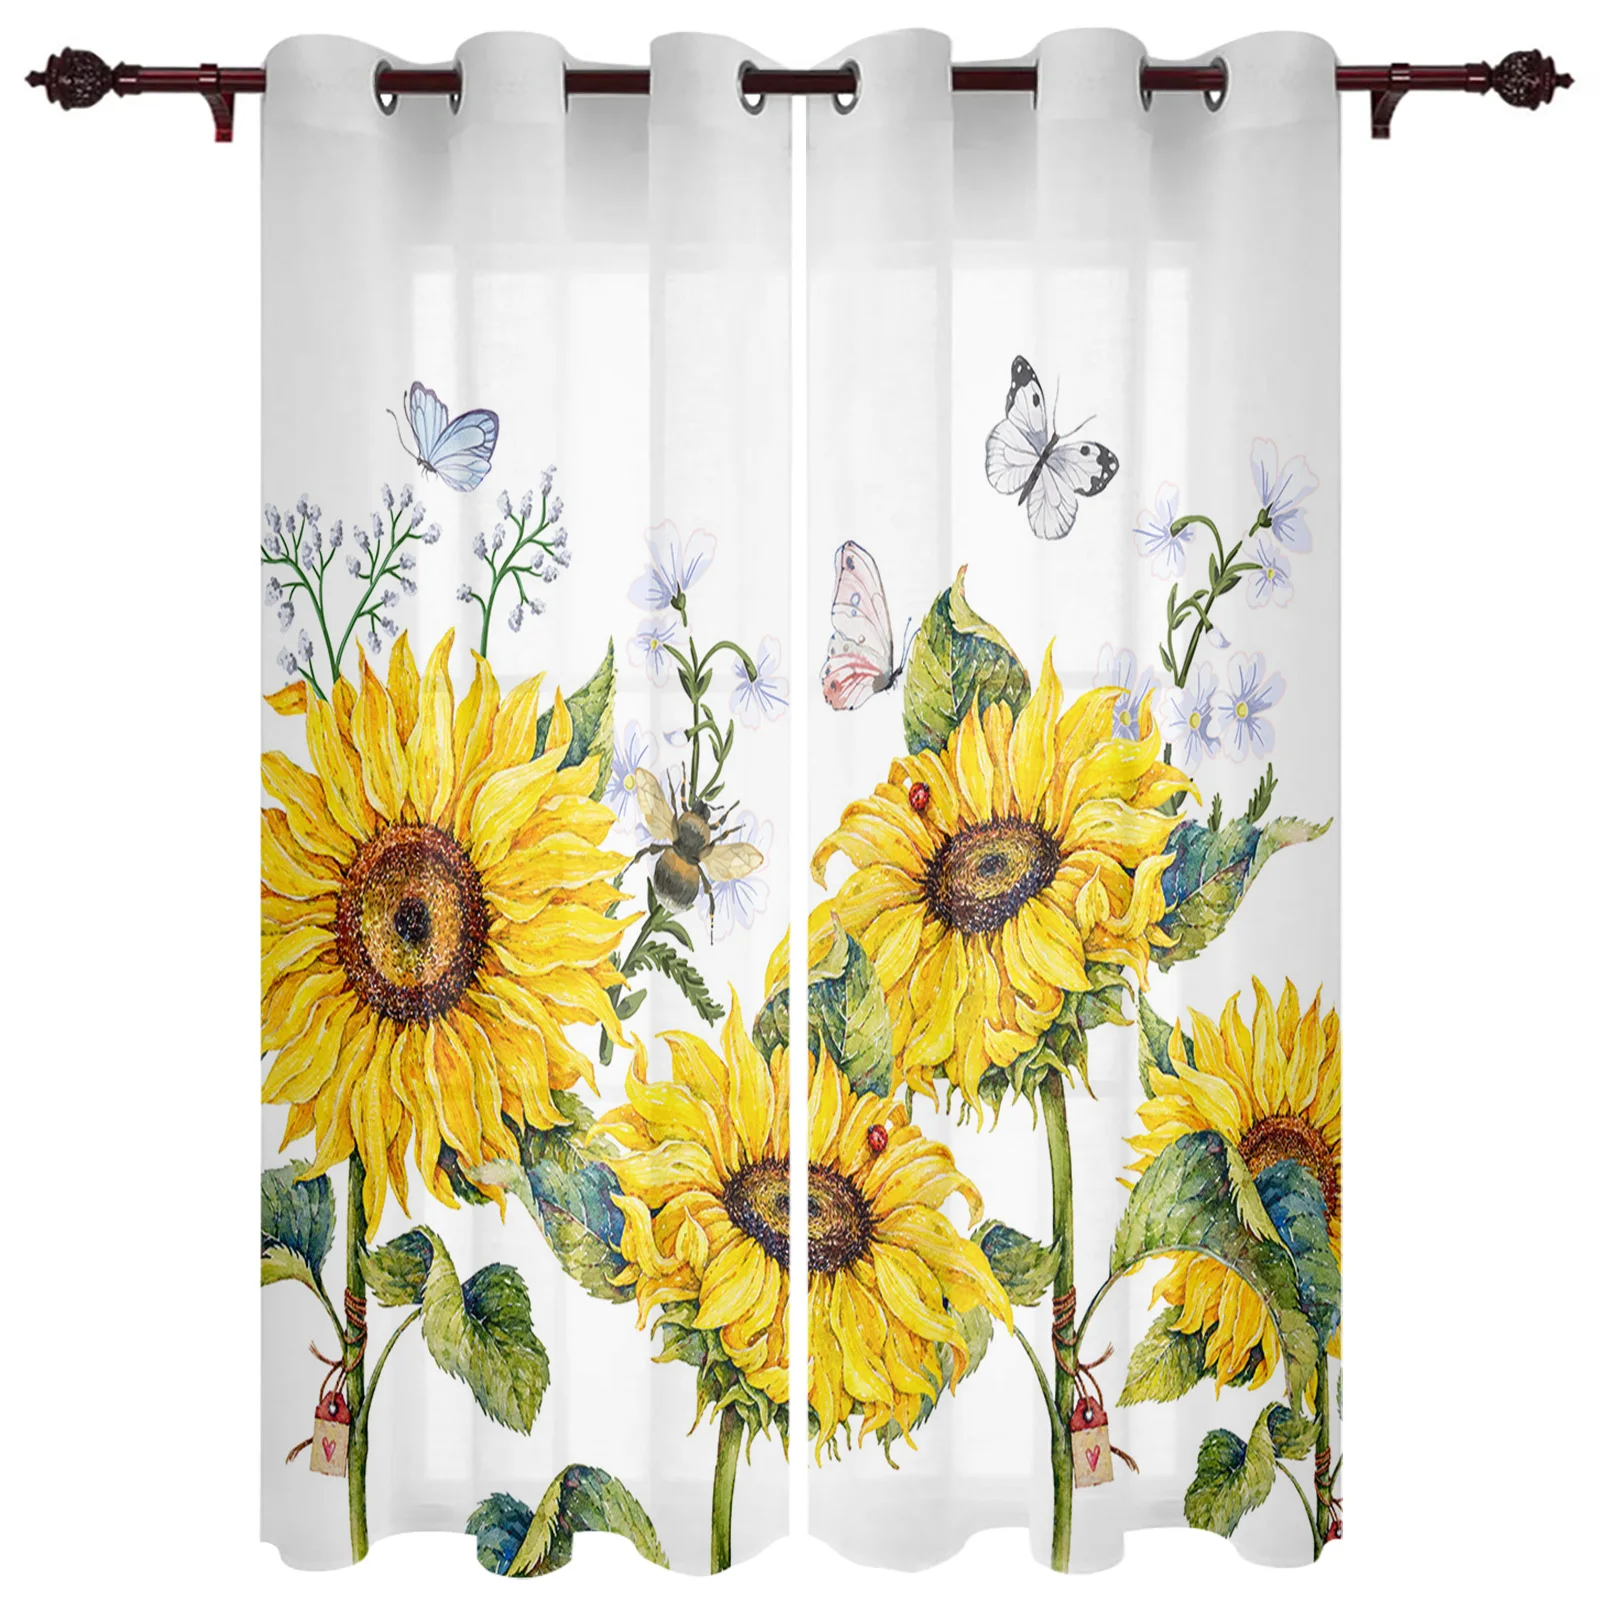 Butterflies & Sunflowers Complete 3 Pc Kitchen Curtain Set Assorted Sizes 